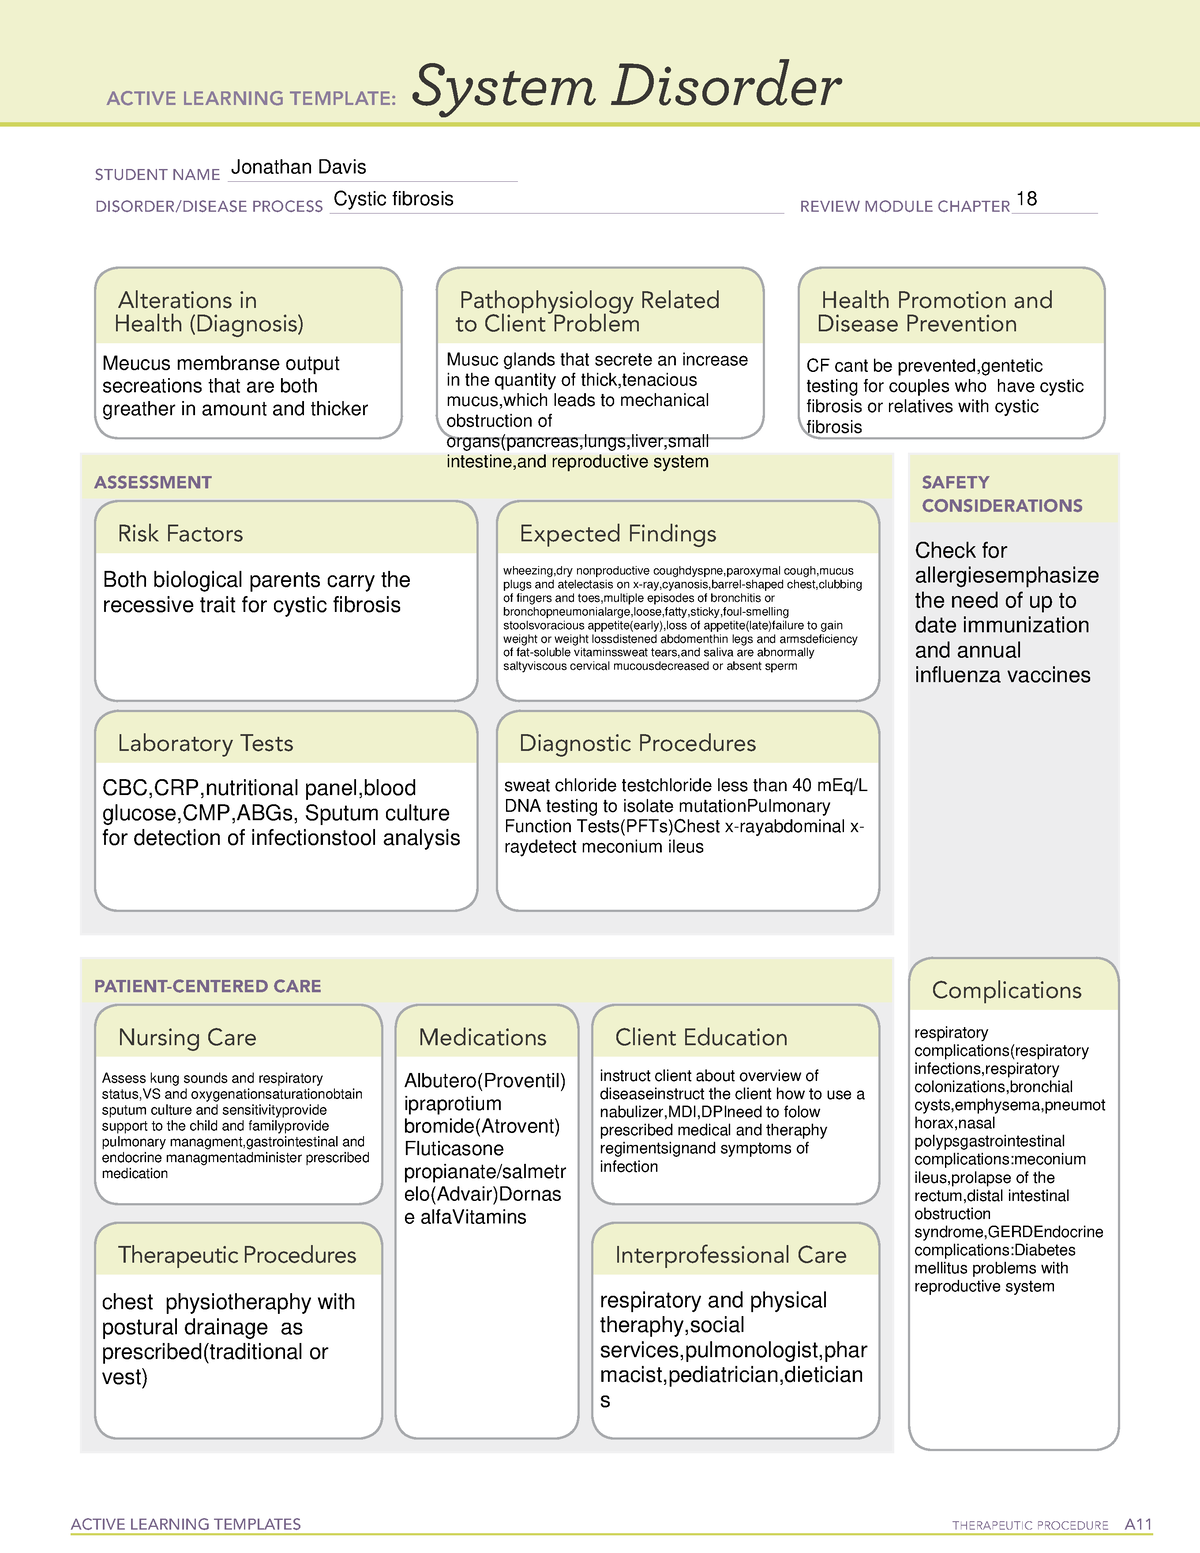 Cystic fibrosis ATI Template ACTIVE LEARNING TEMPLATES